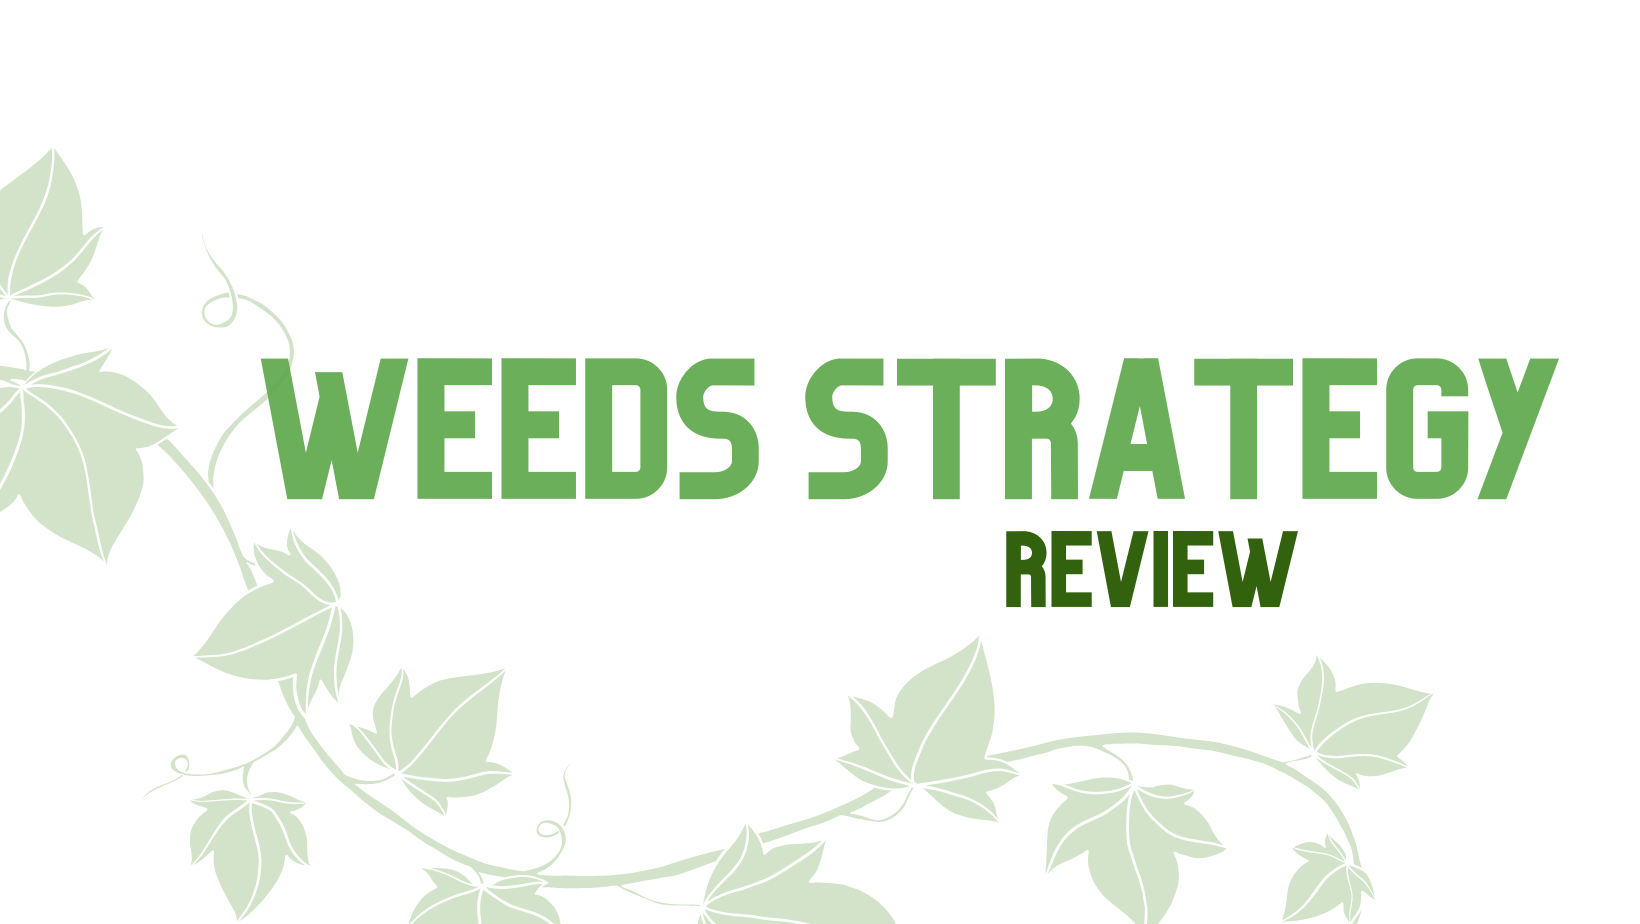 Weed Strategy Review: Draft Strategy Public Comment